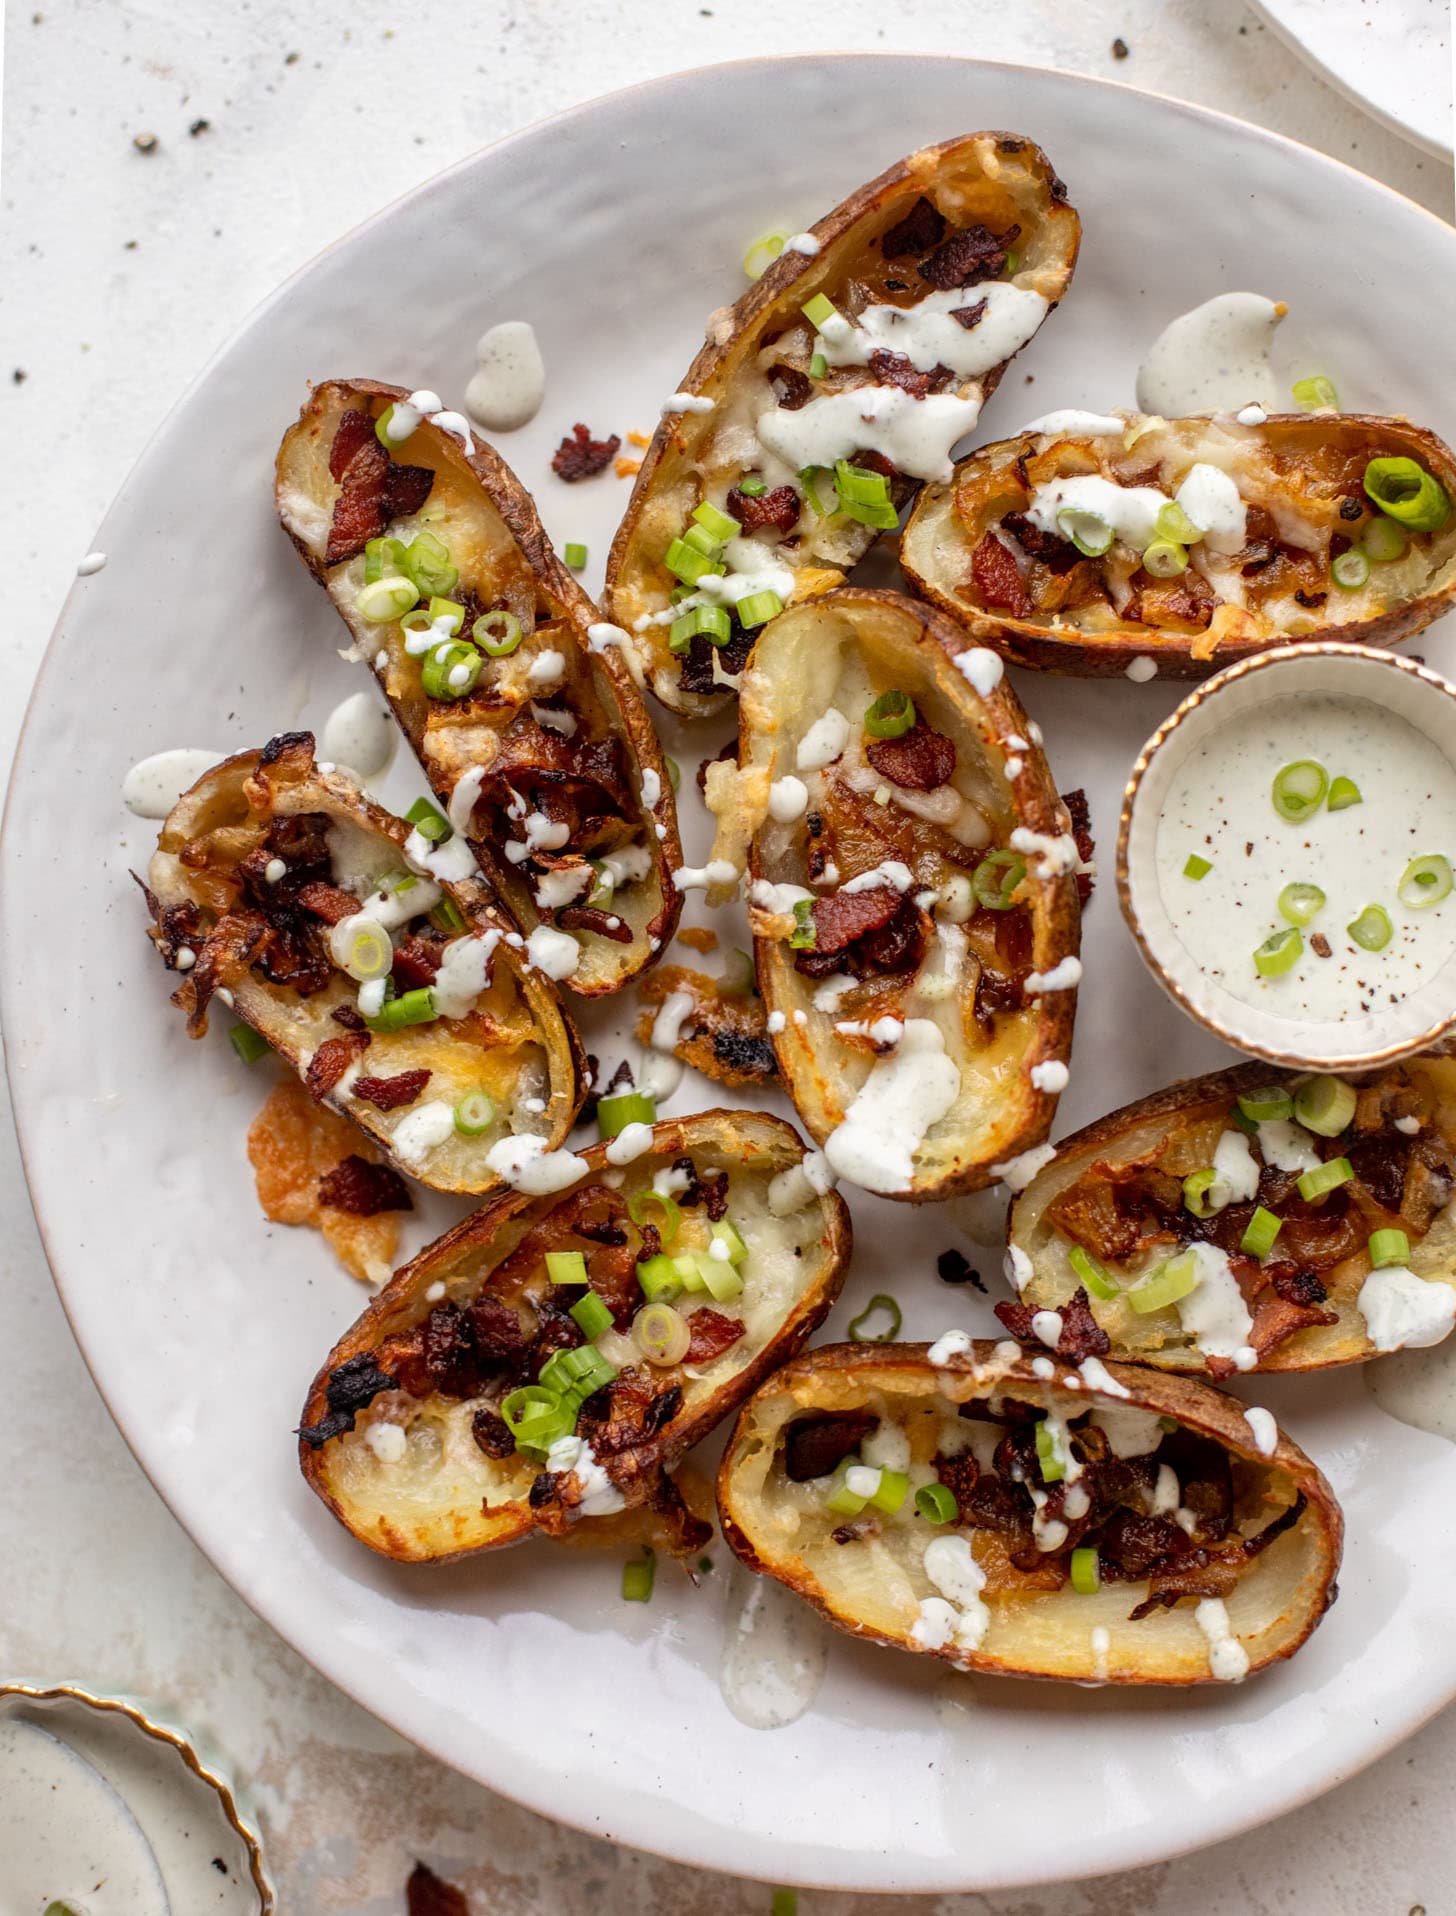 32 Super Bowl Recipes for Game Day